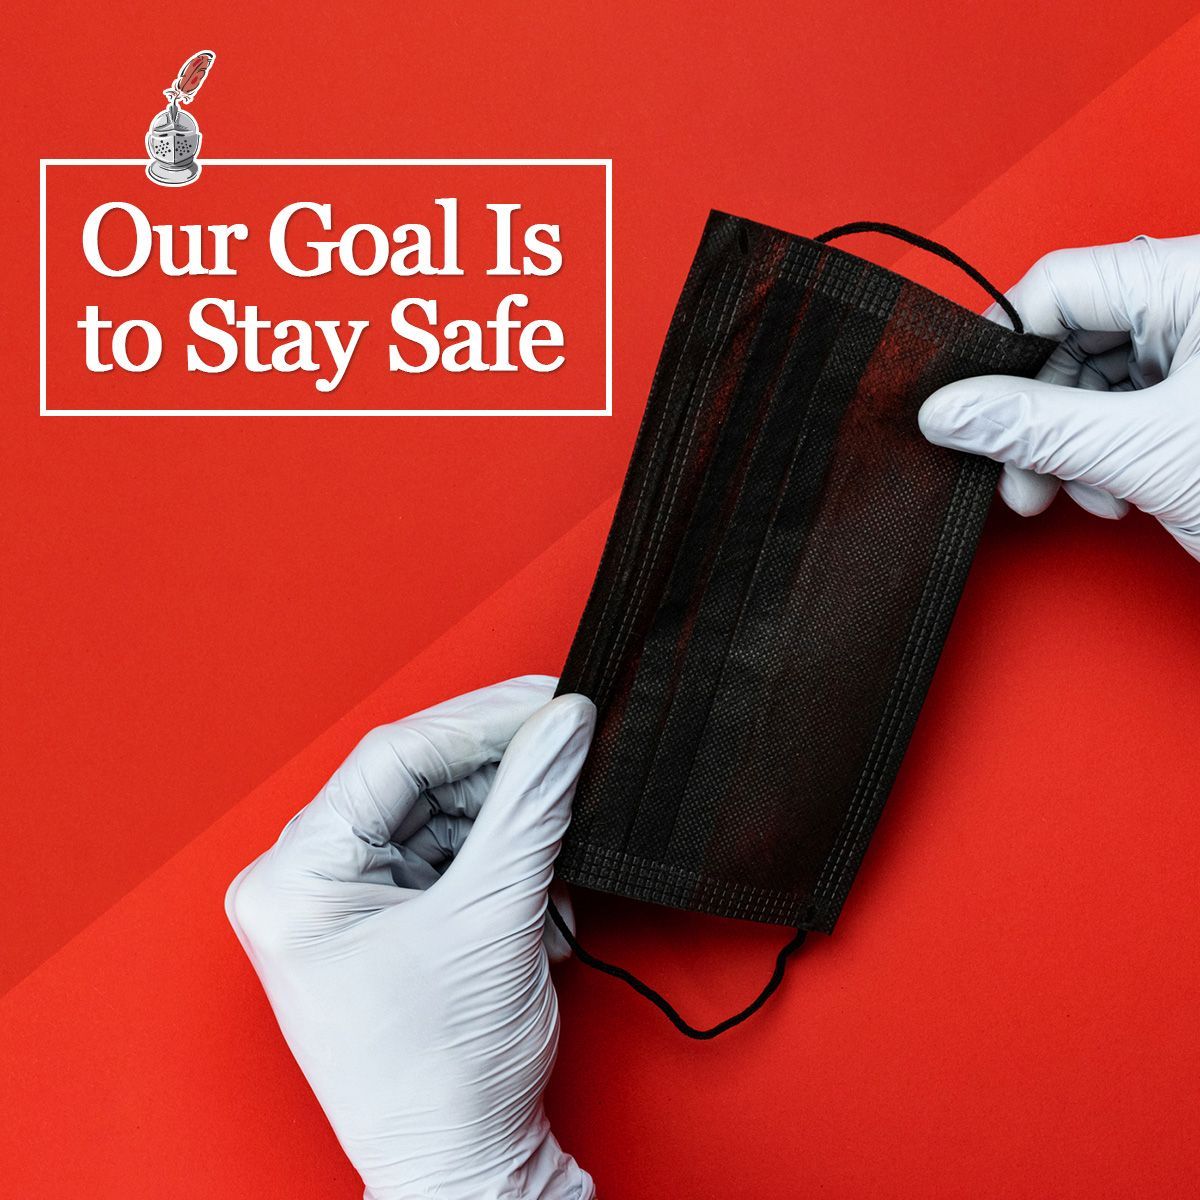 Our Goal Is to Stay Safe